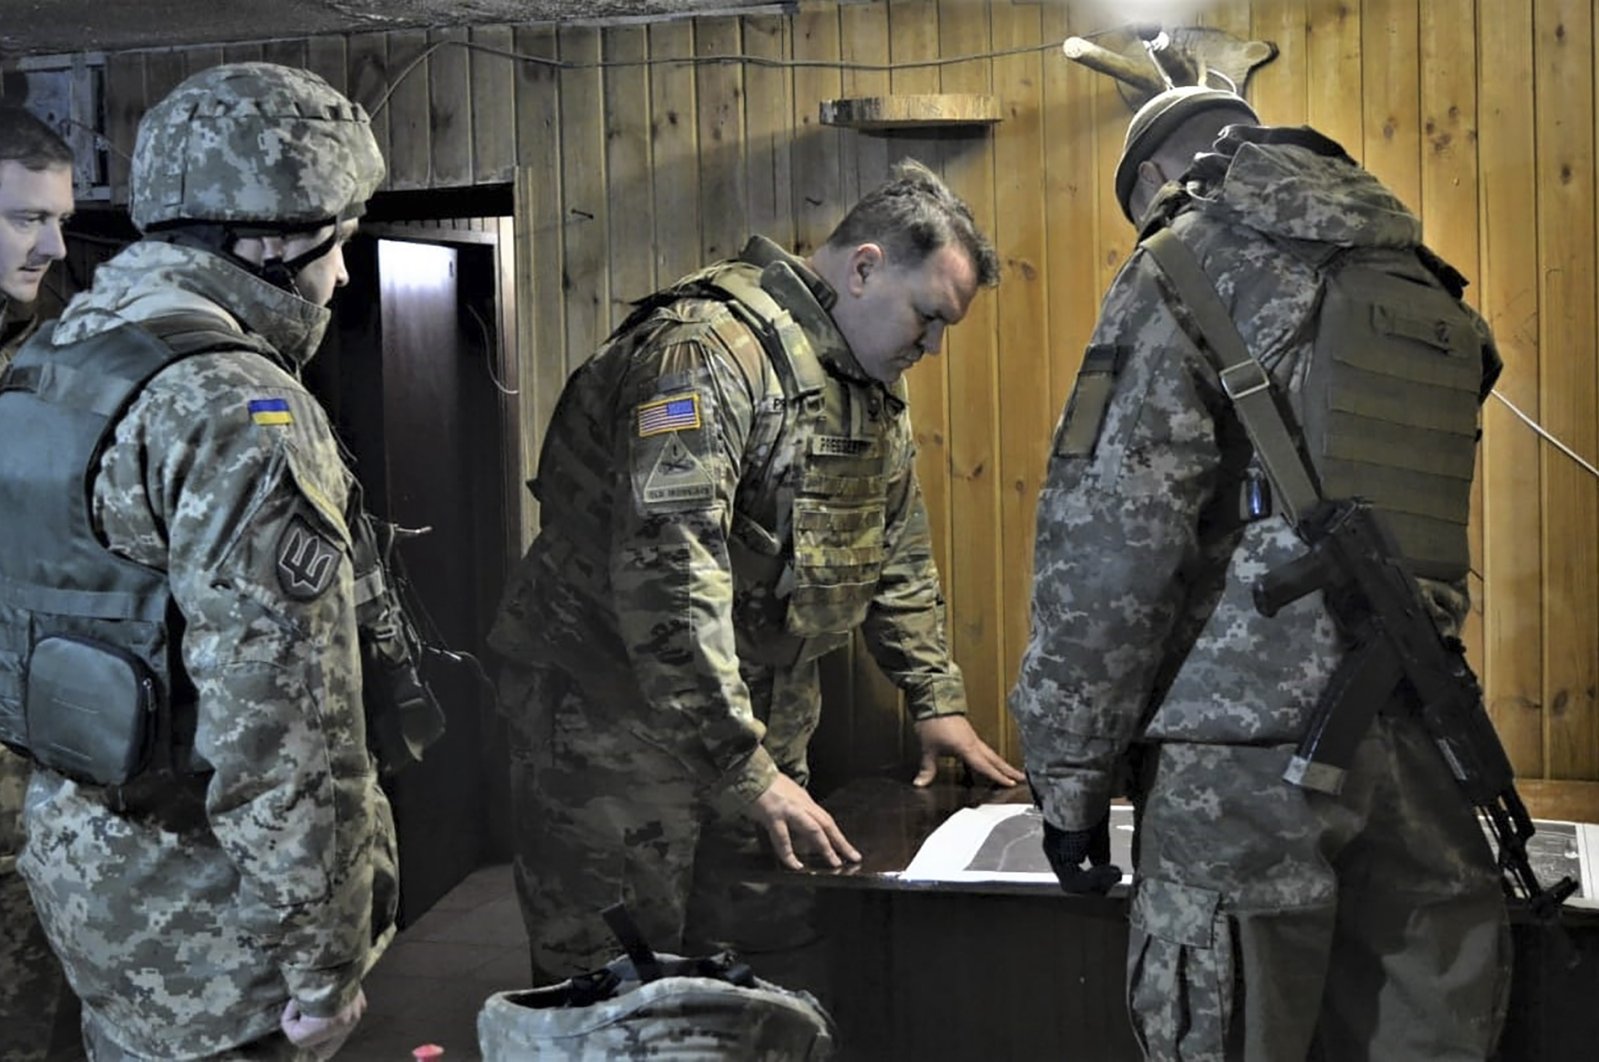 Attache of the Land Forces at the U.S. Embassy in Ukraine Col. Brandon Presley looks at the map during the visit by a delegation of the U.S. Embassy in Ukraine to the Joint Forces operation area in the war-hit Donetsk region, Ukraine, Nov. 19, 2021. (AFP Photo)